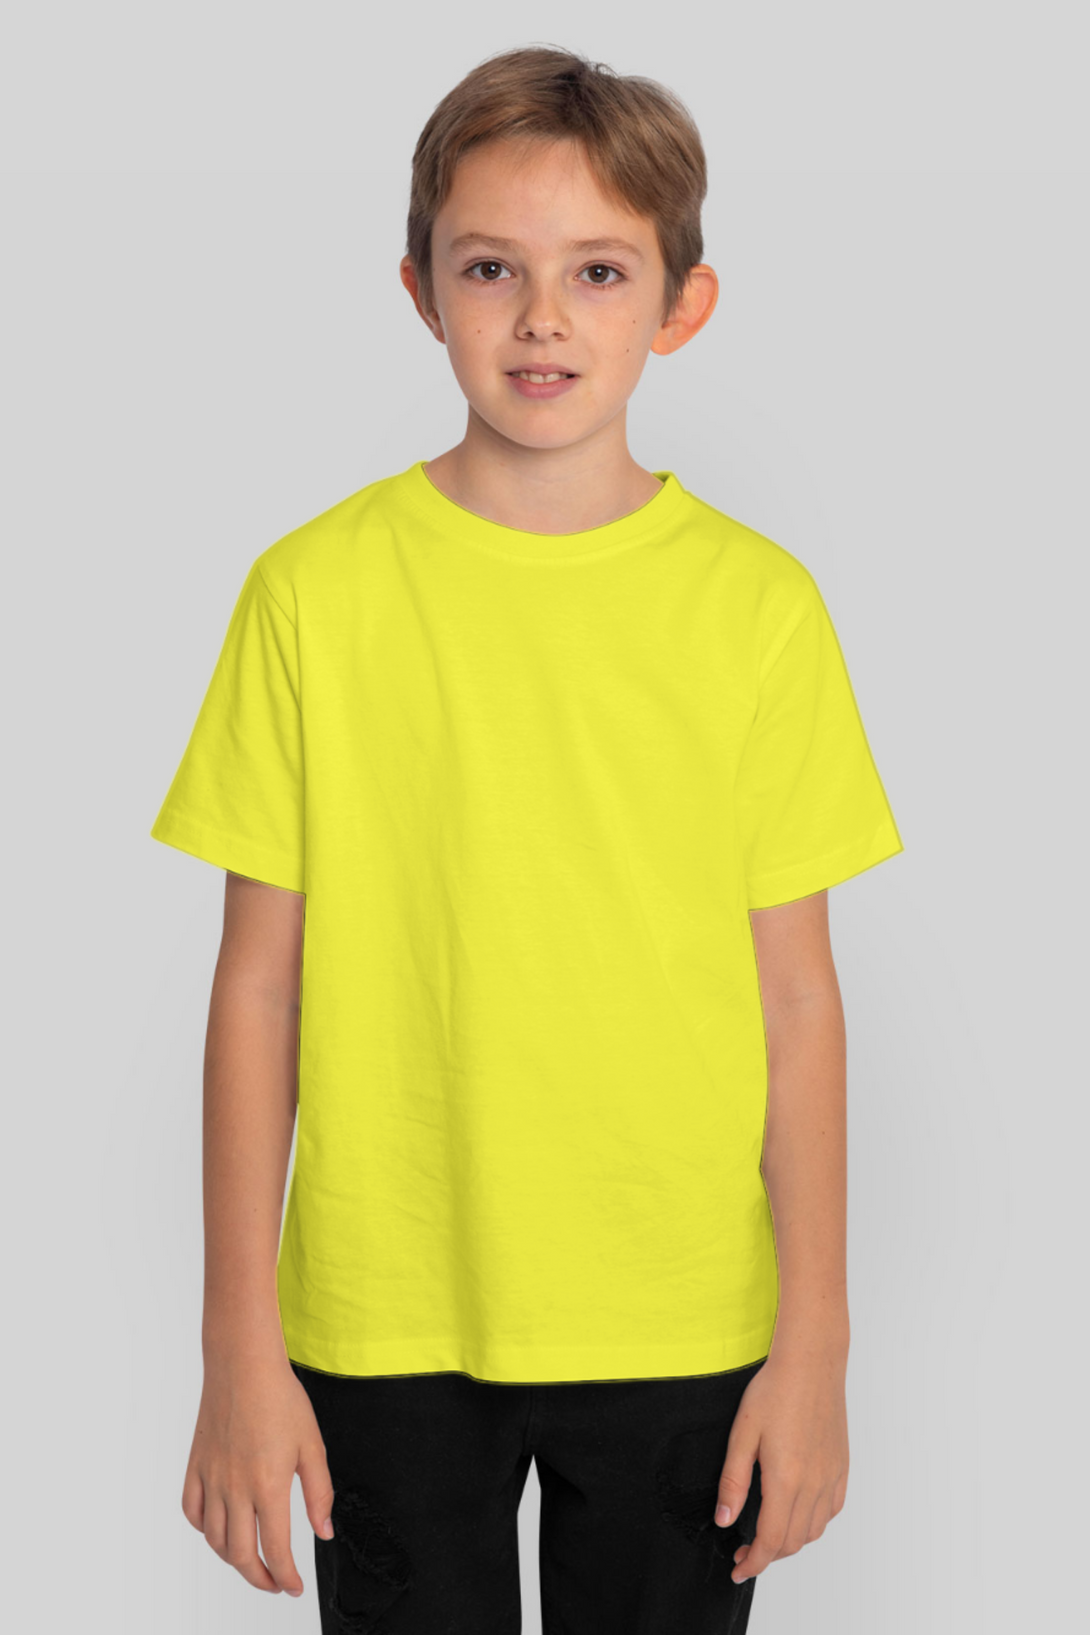 Bright Yellow T-Shirt For Boy - WowWaves - 1